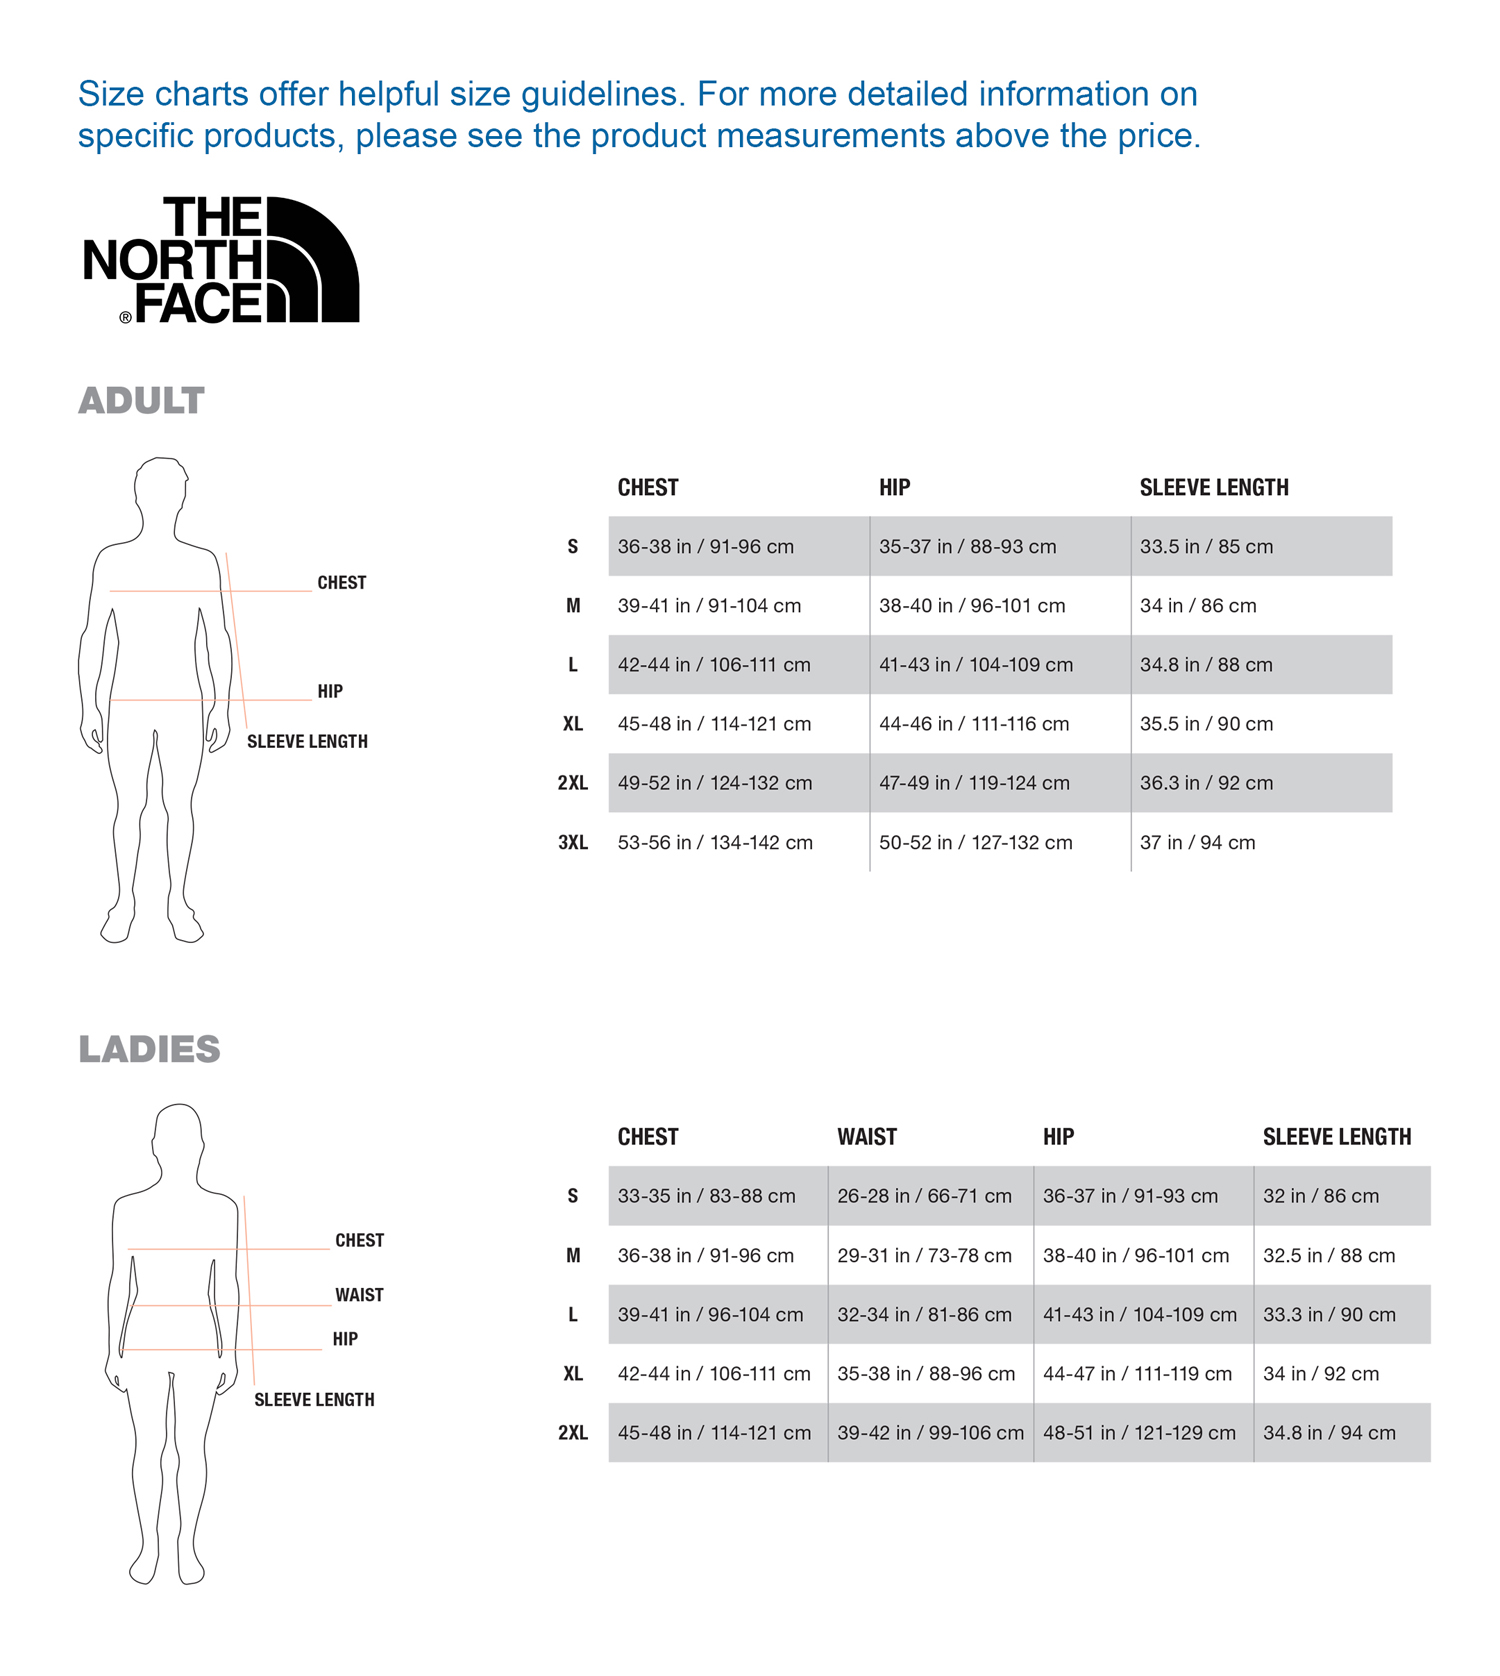 North Face Women's Sizing Chart